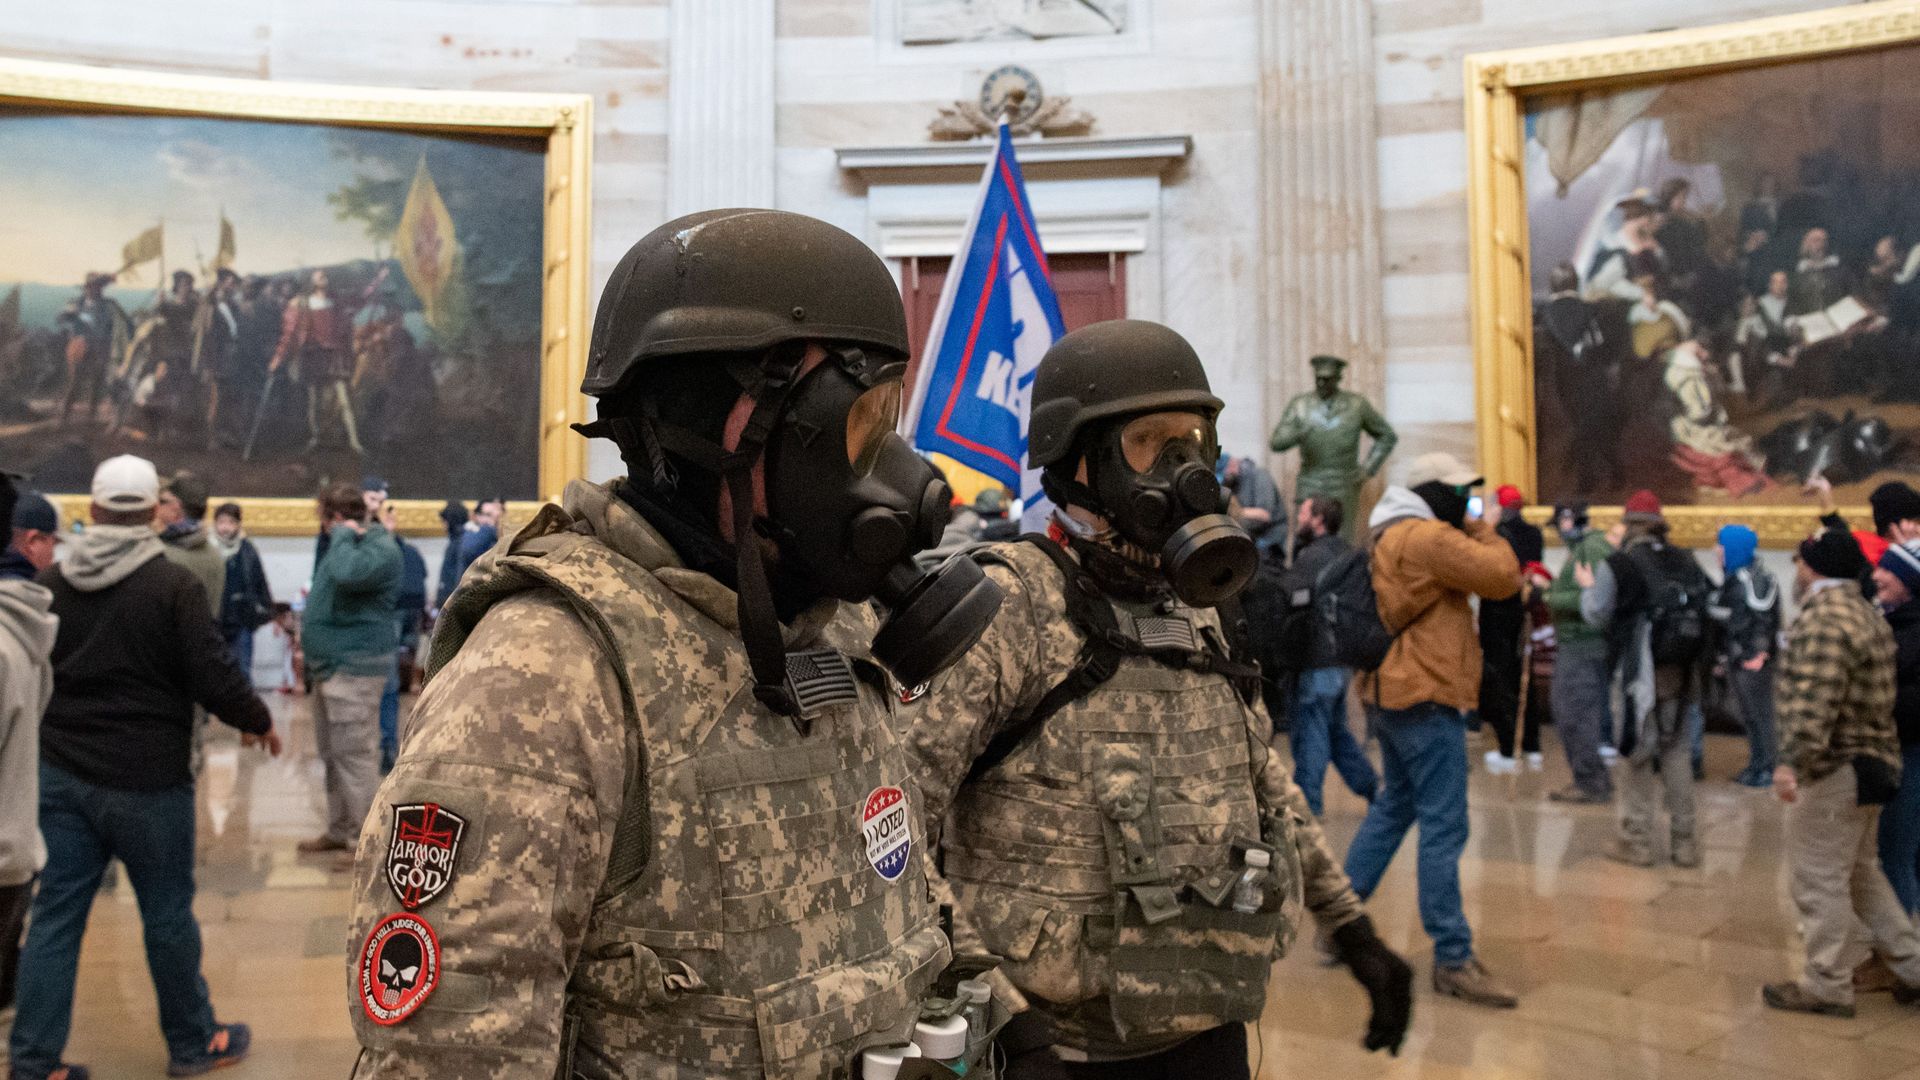 Two people wearing gas masks, helmets and fatigues walk through the Capitol 